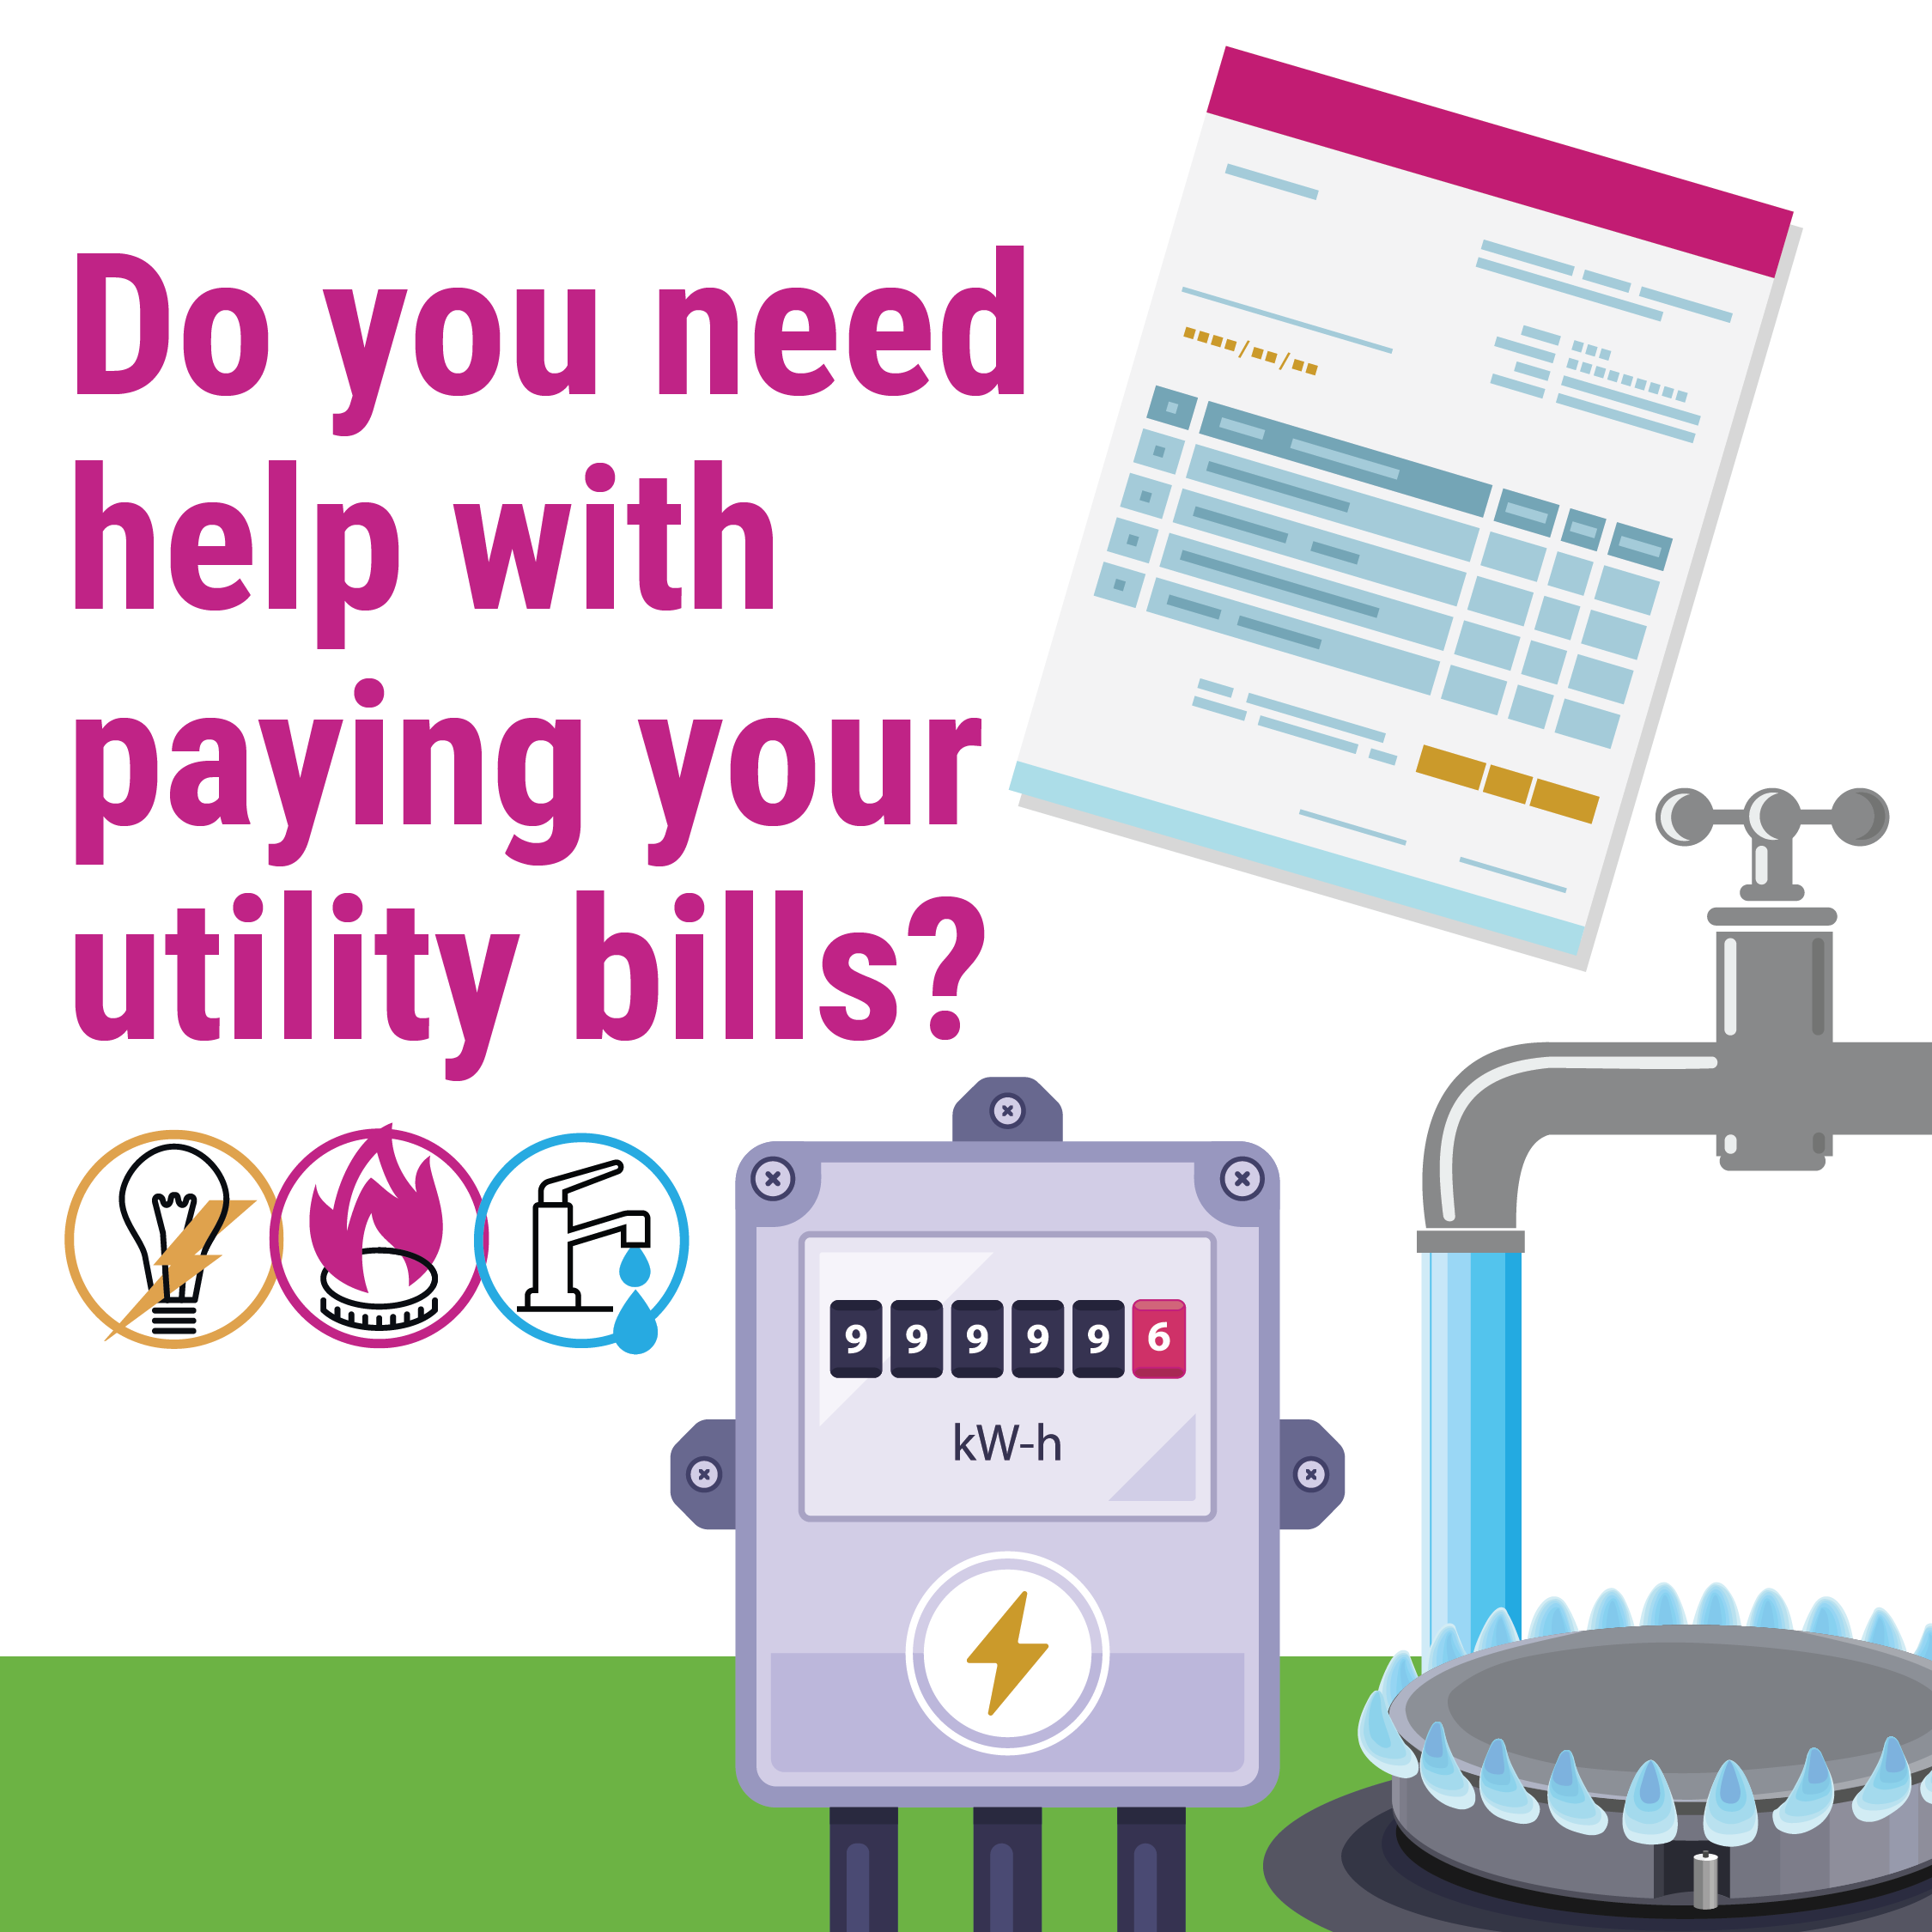 A bill, running water tap, electricity meter and gas hob with text: "Do you need help with paying your utility bills?"